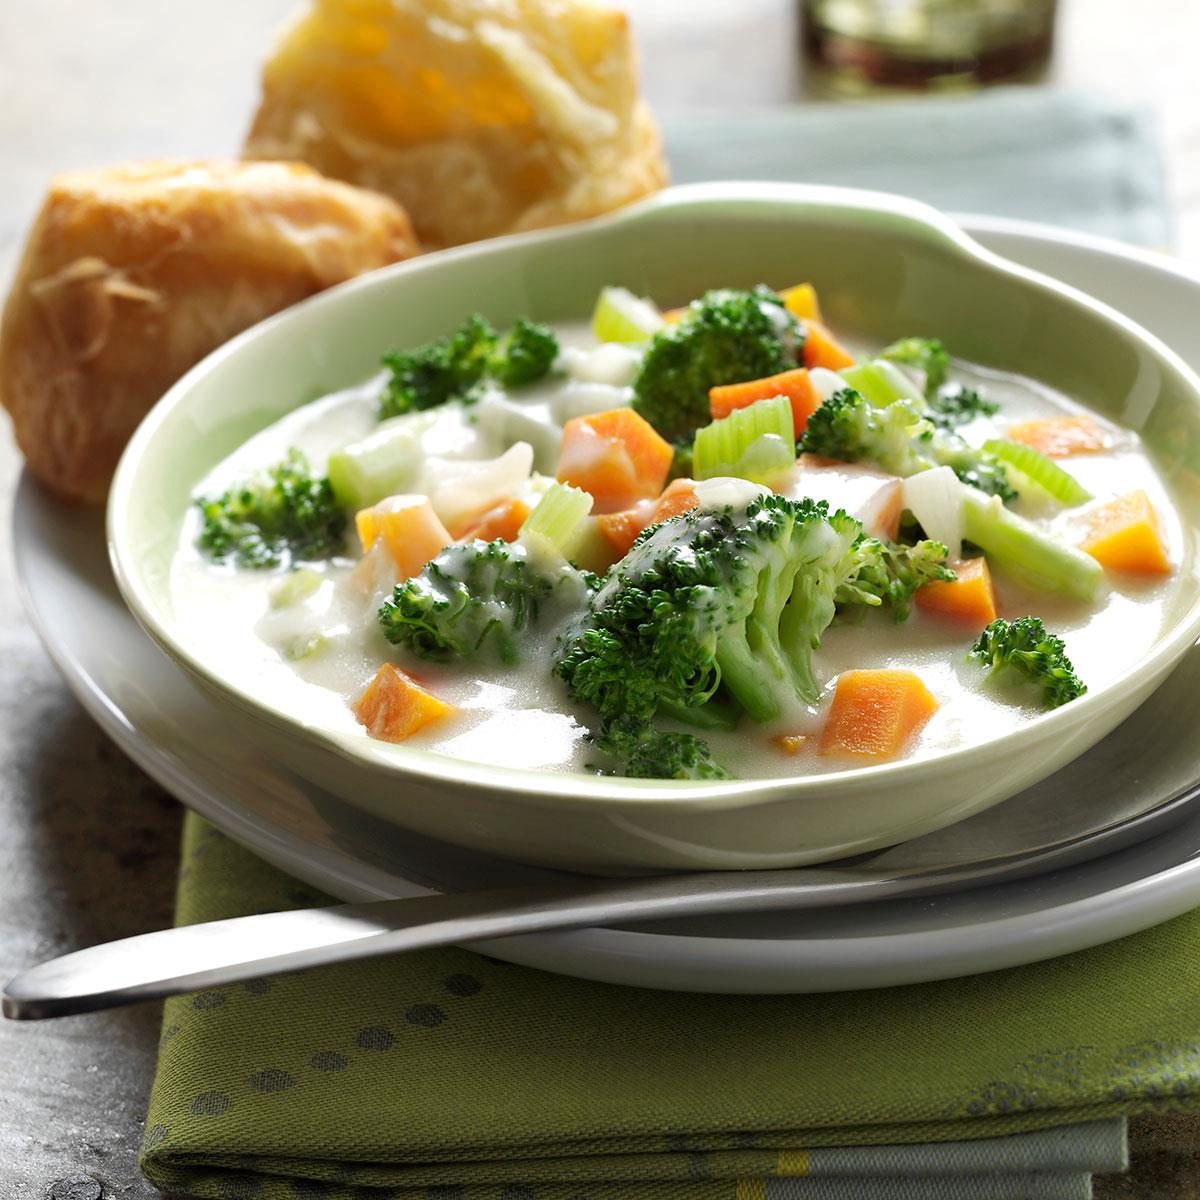 Best Broccoli Soup Recipe: How to Make It